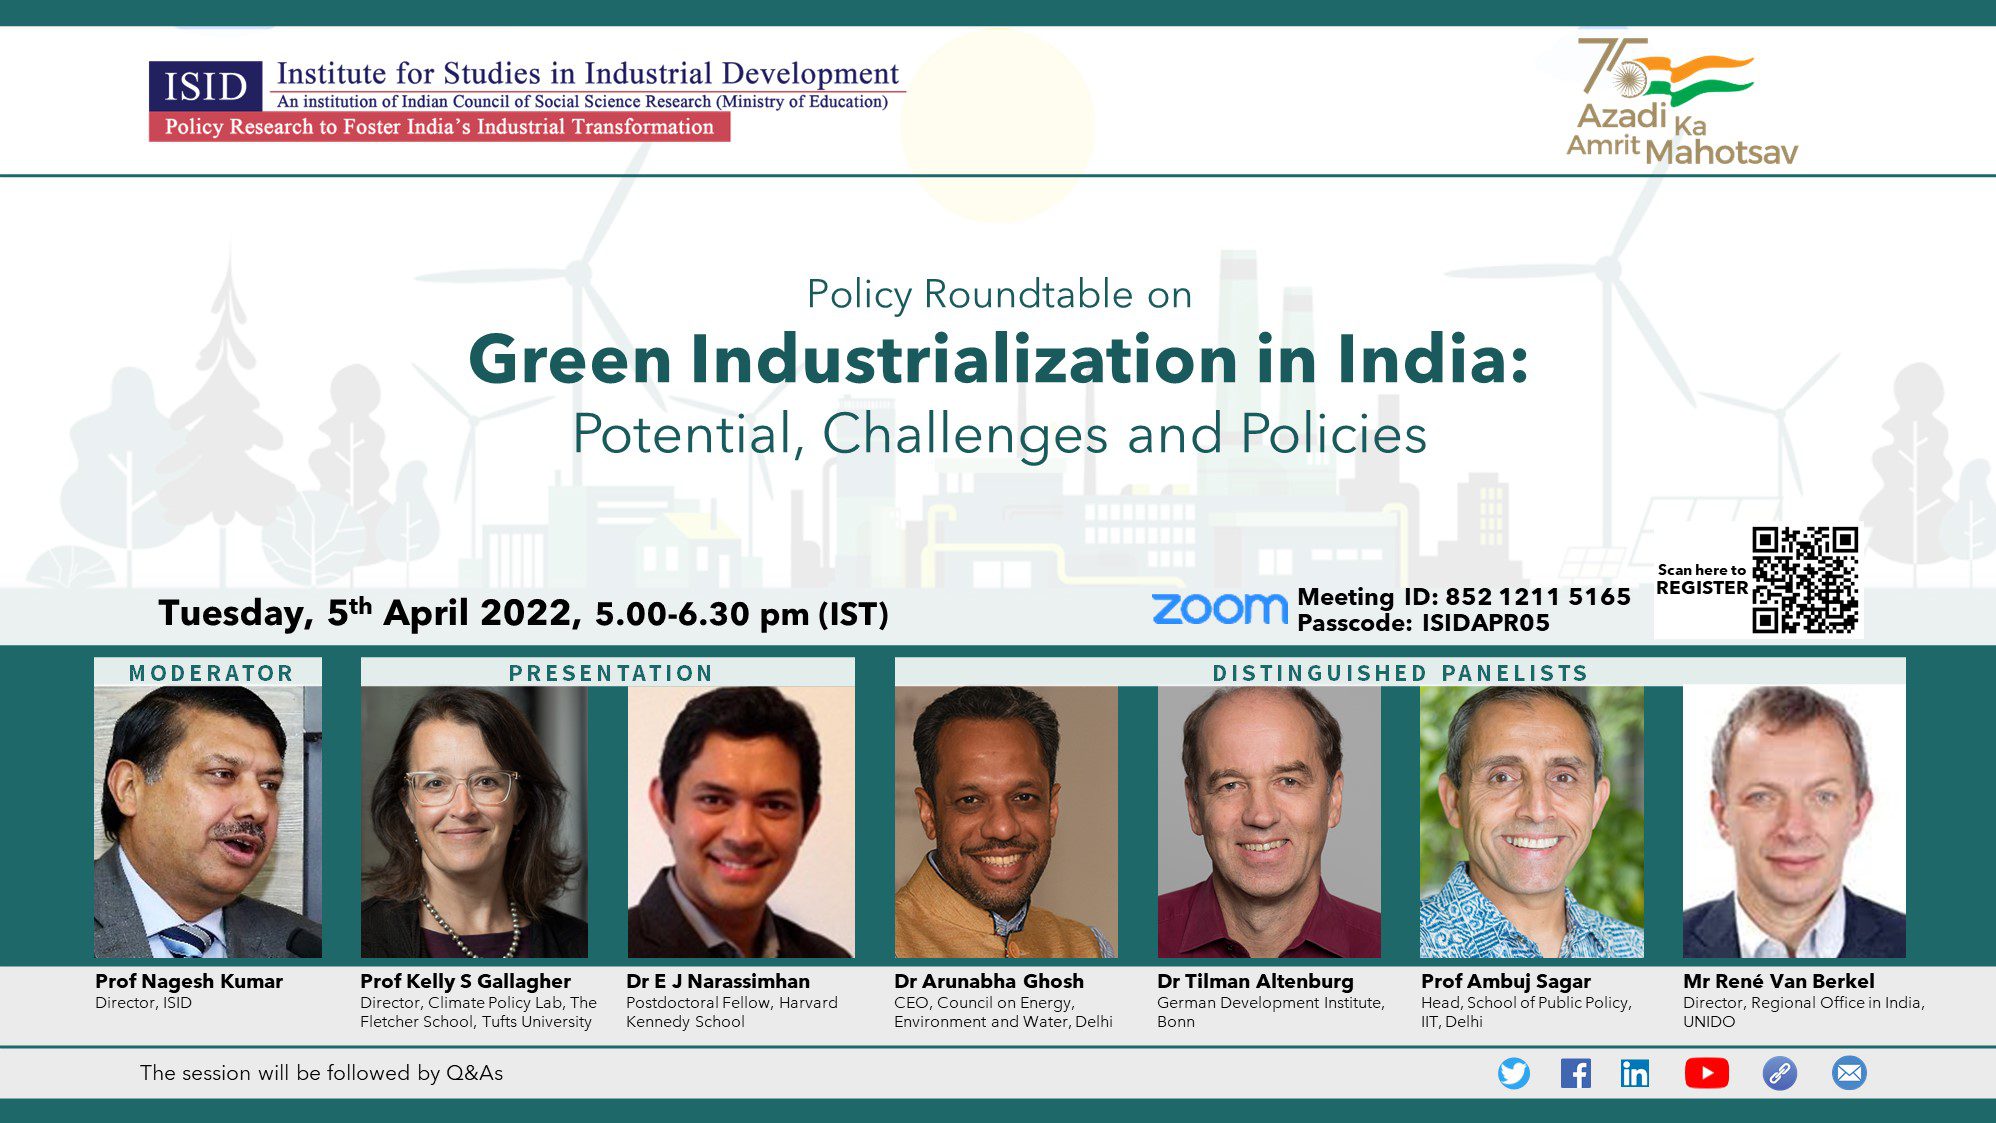 Policy Roundtable on Green Industrialization in India: Potential, Challenges and Policies